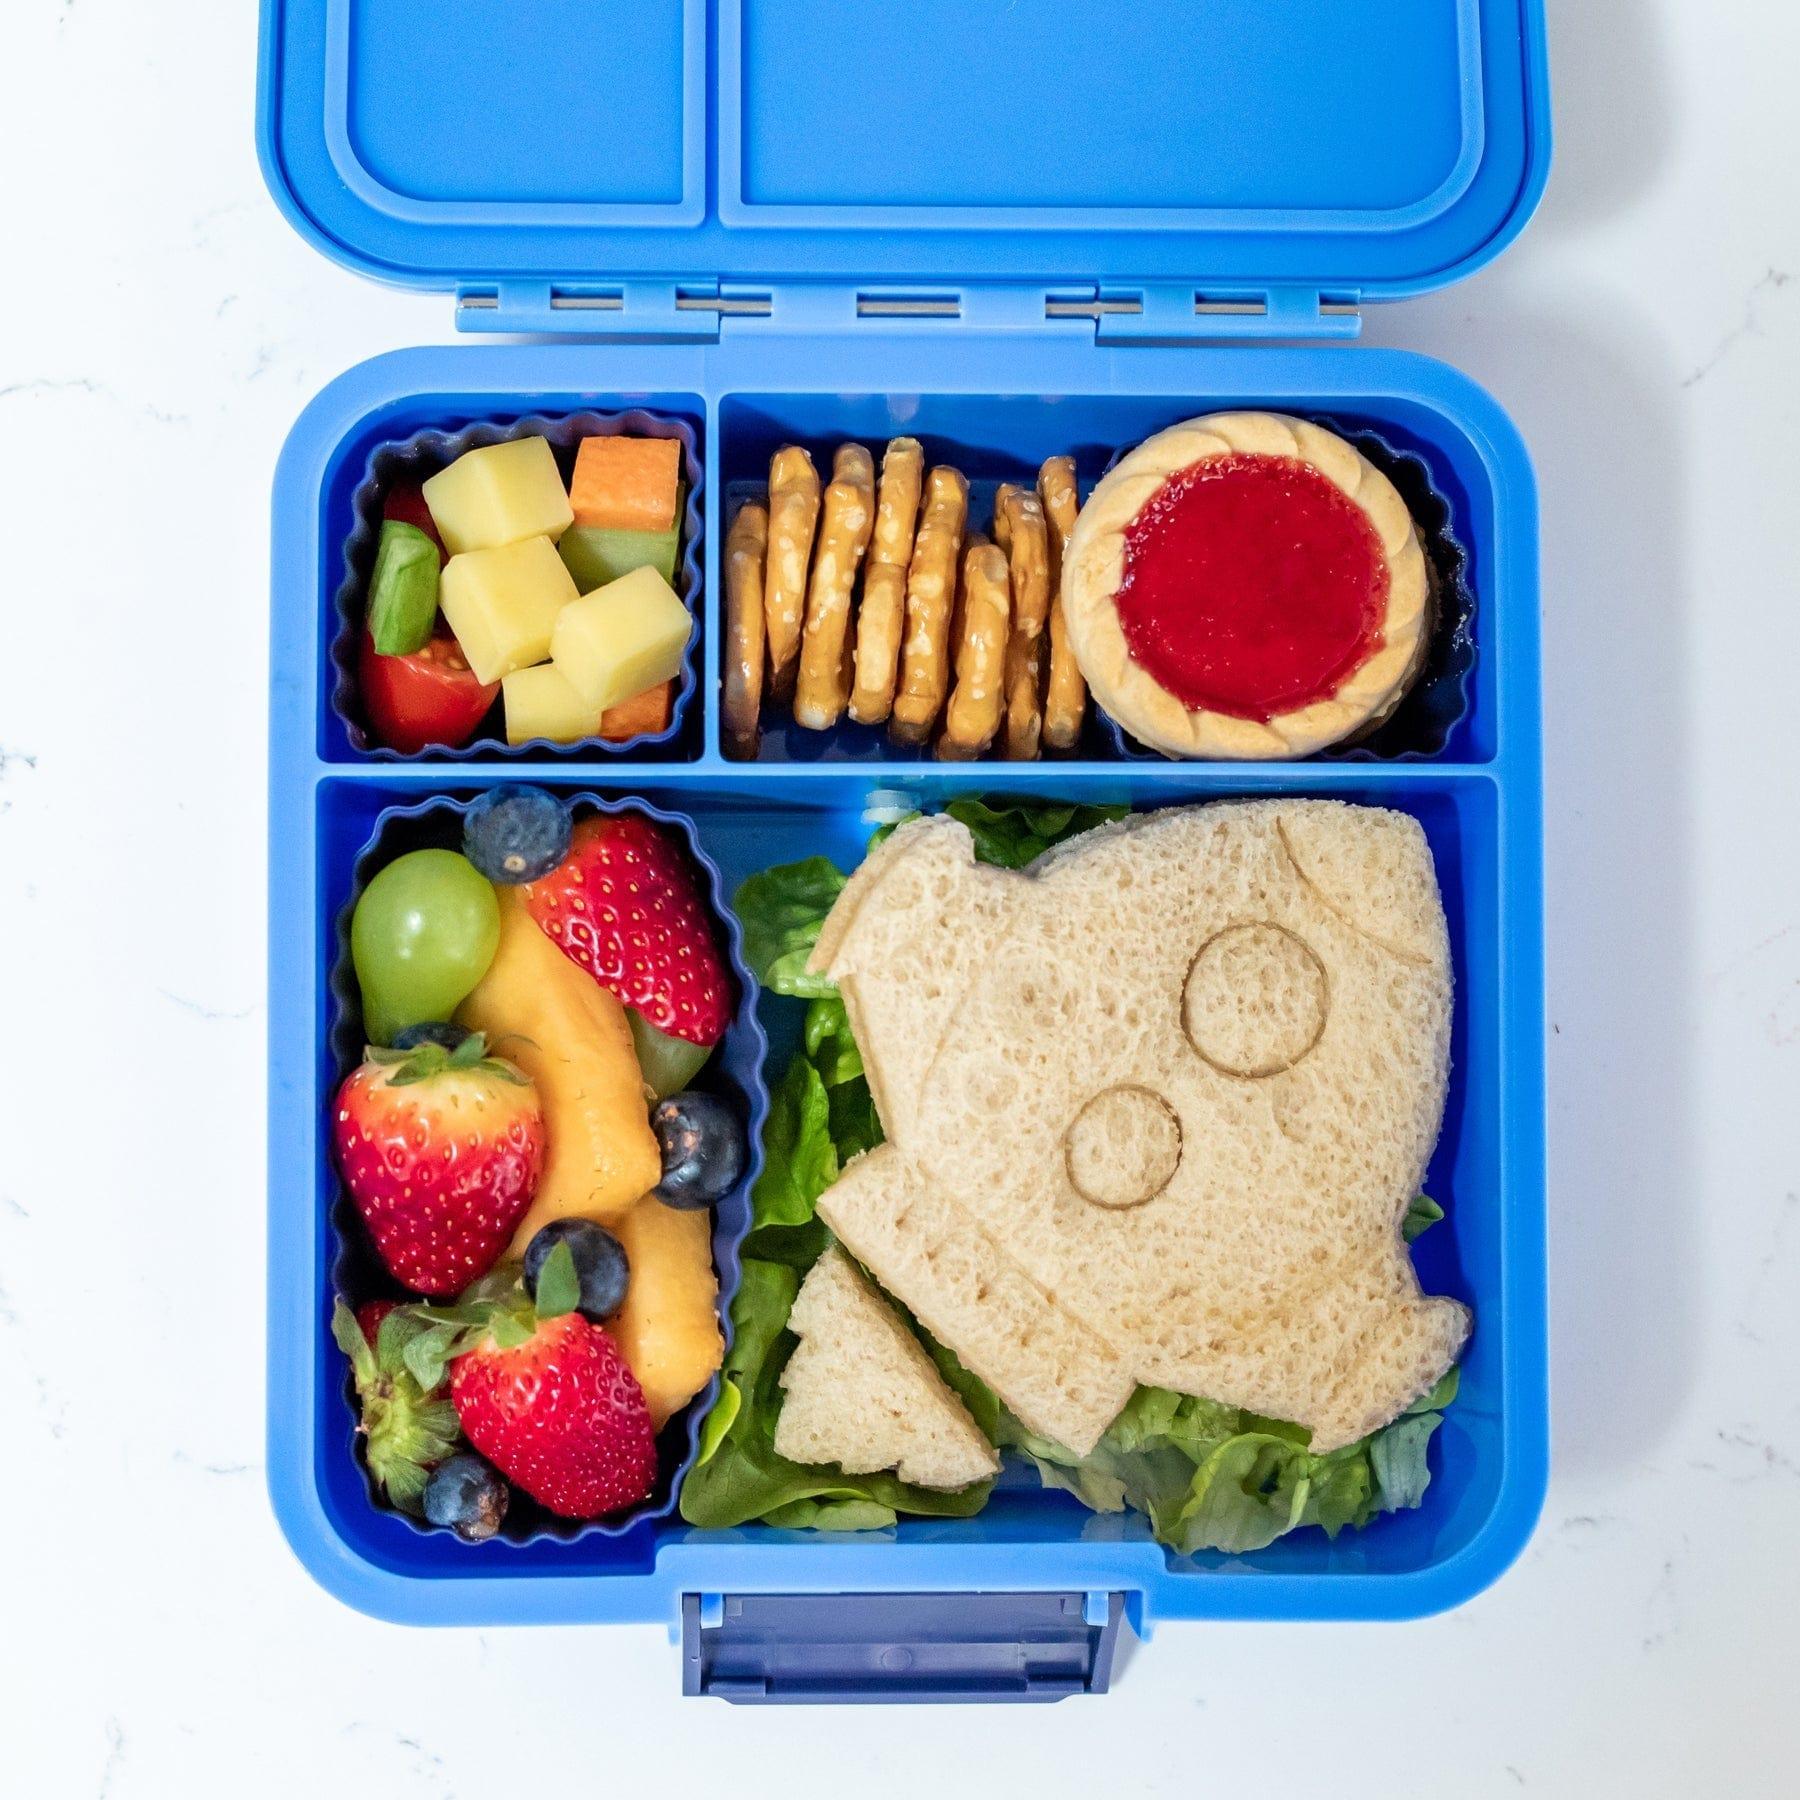 MONTII.CO Little Lunch Box Co | Bento Three - Blueberry